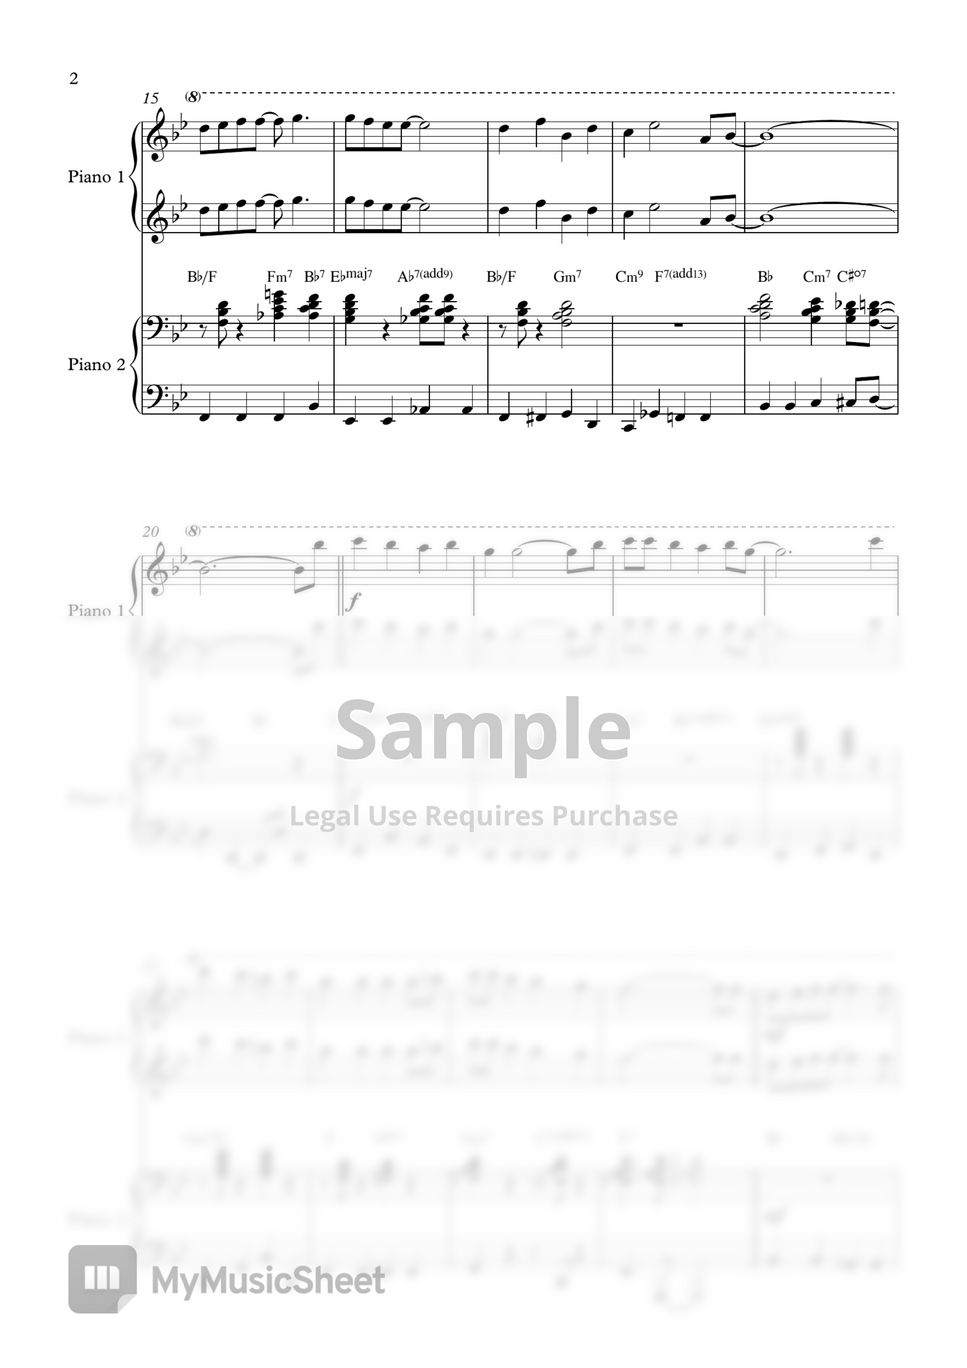 Michael Buble - Santa Claus Is Coming To Town (Piano Sheet) by Pianella Piano